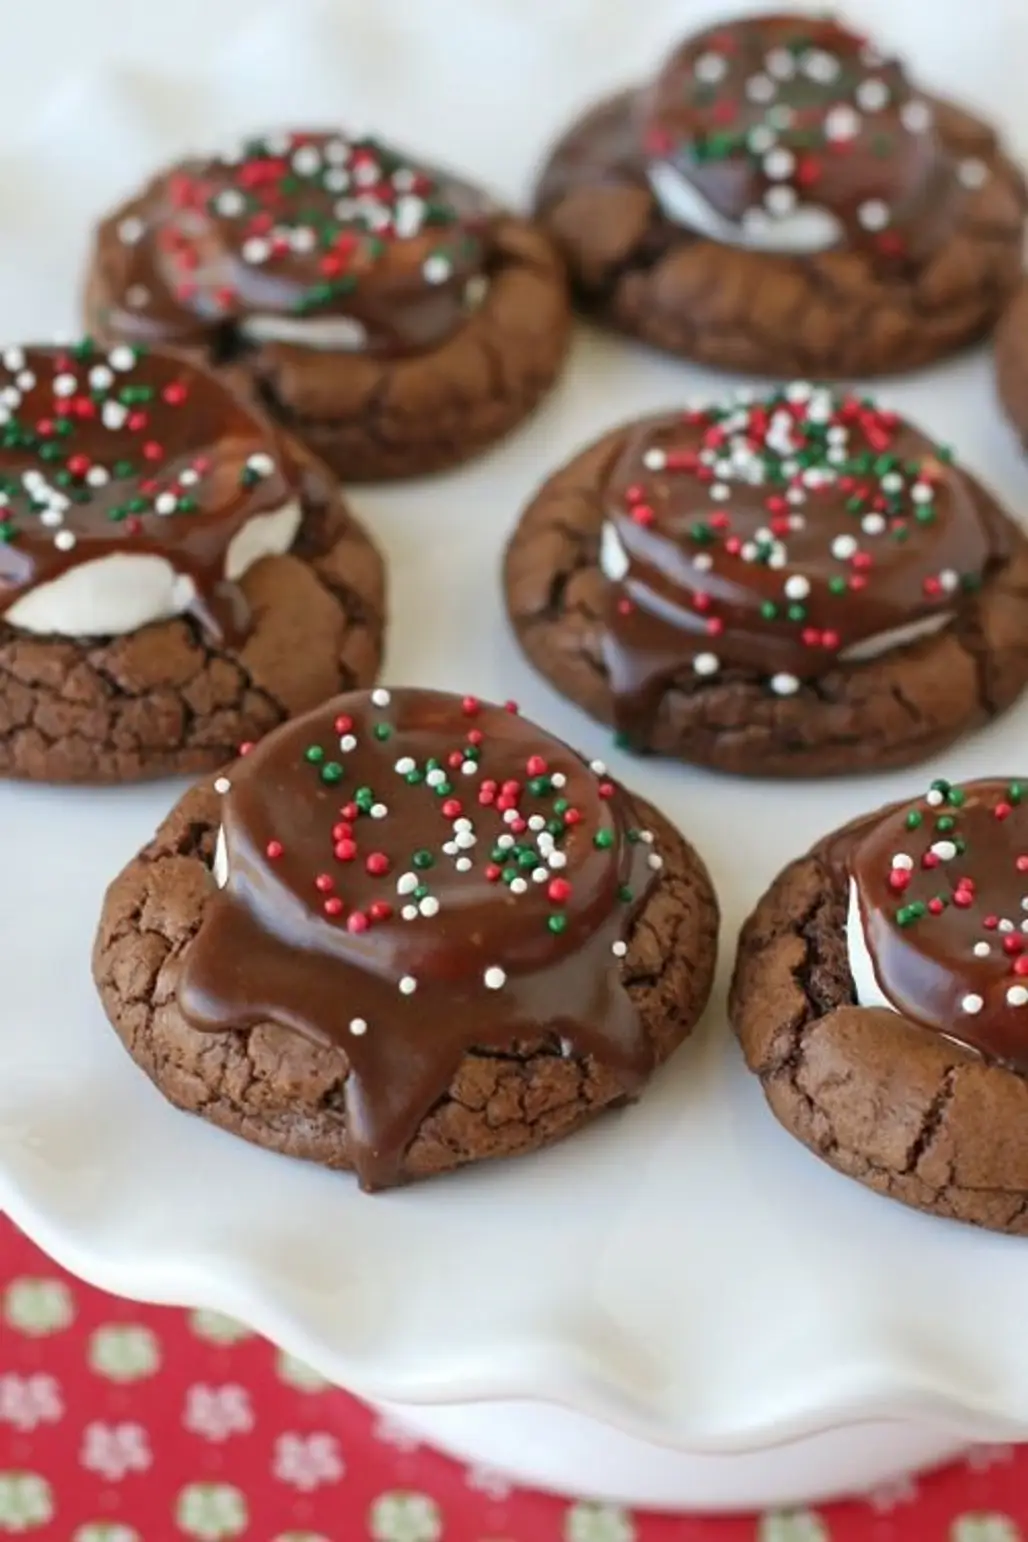 More Cocoa Cookies